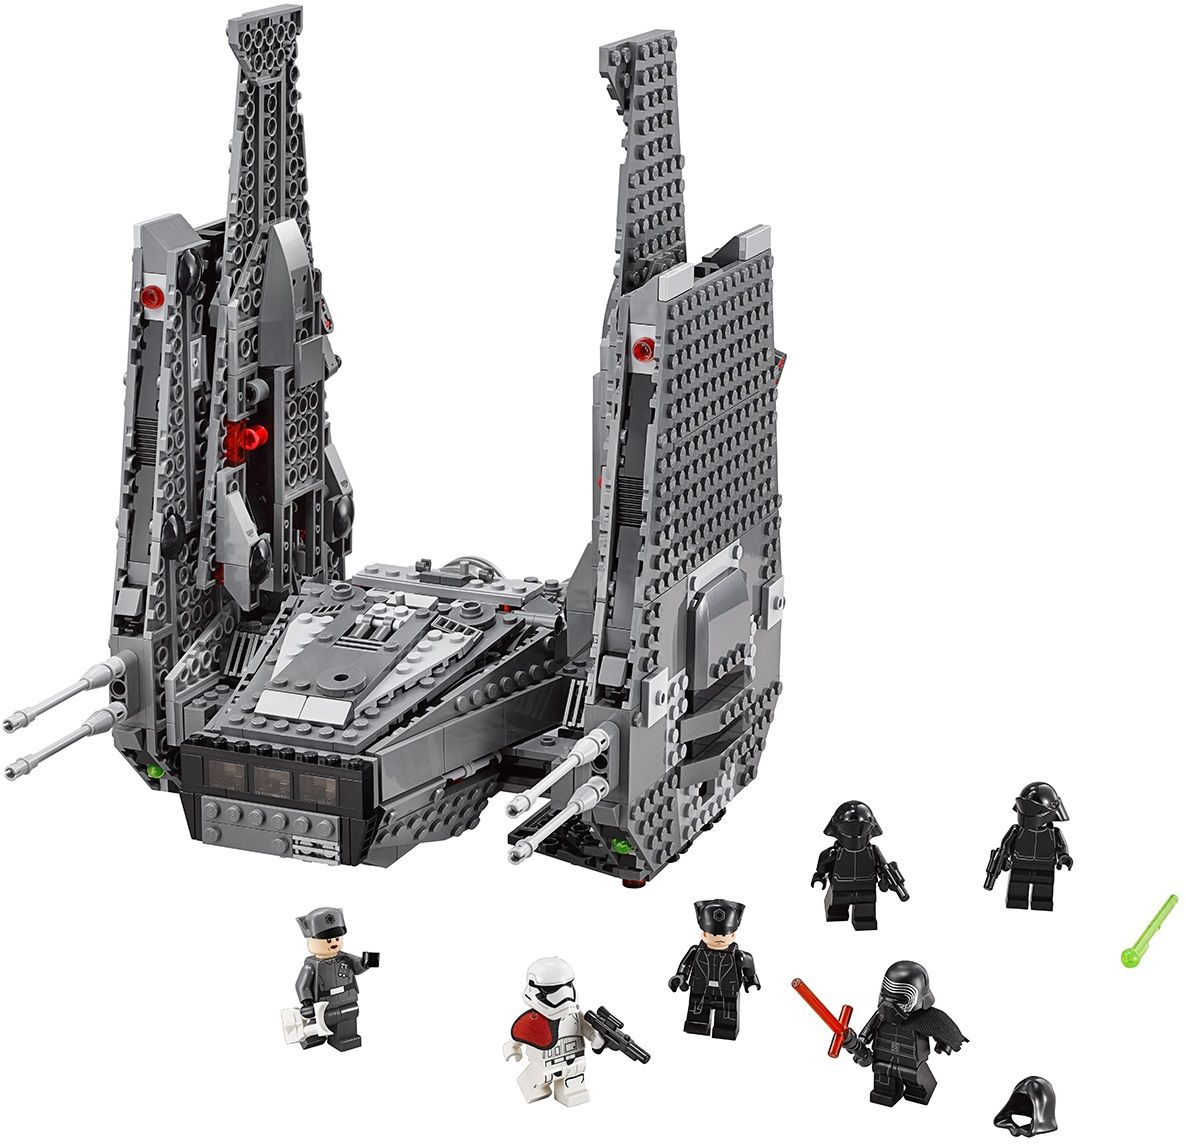 Upcoming LEGO Star Wars The Force Awakens 2015 Sets | Geek ...